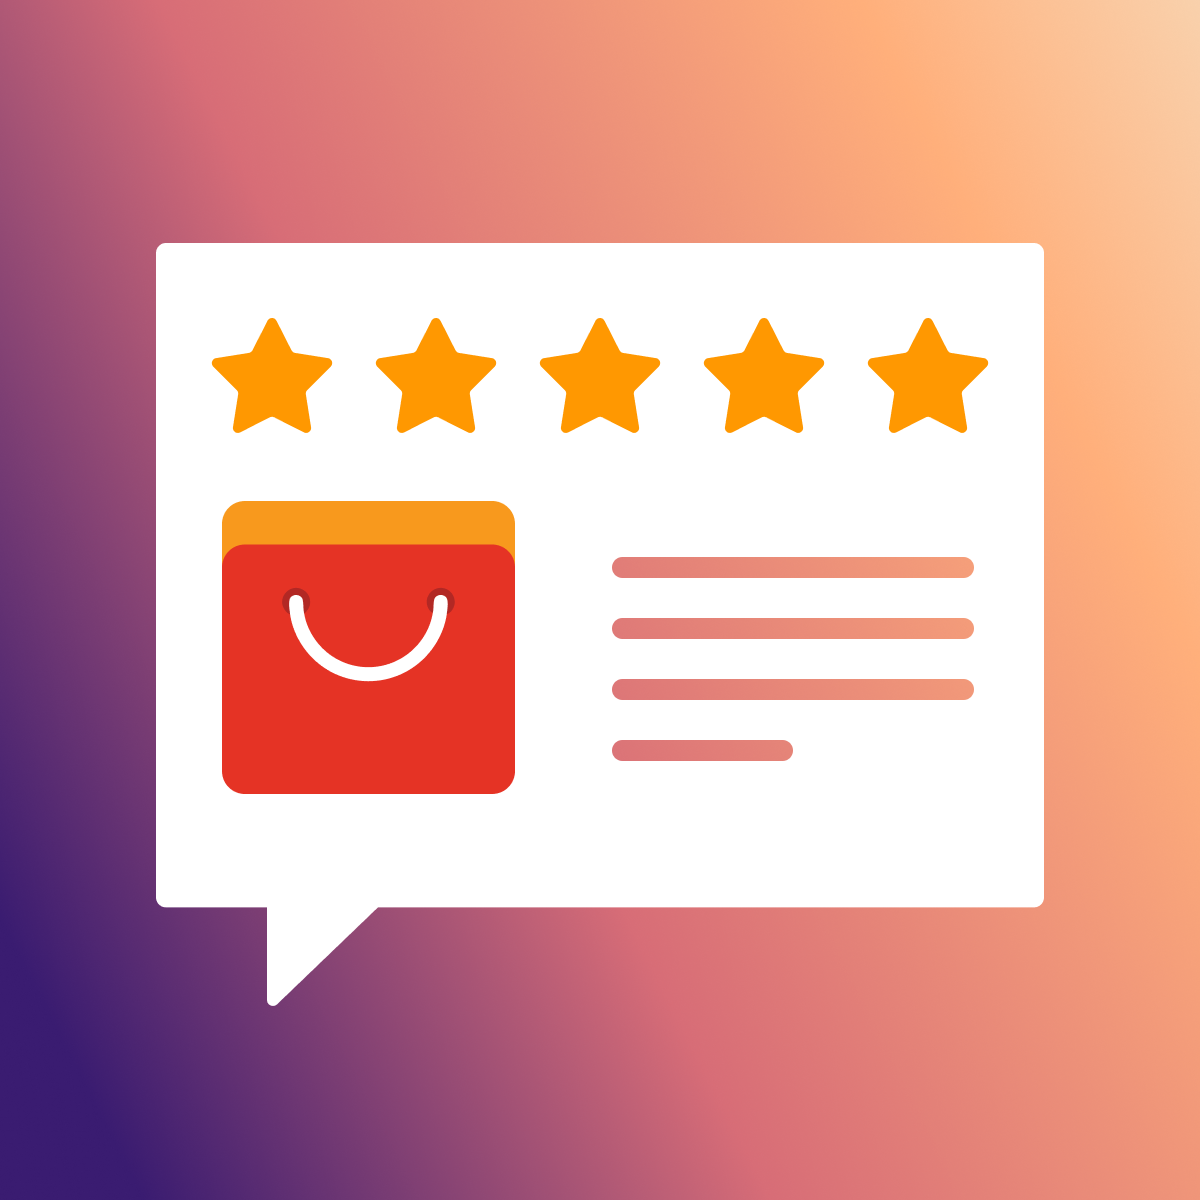 Hire Shopify Experts to integrate AliExpress Reviews by Reputon app into a Shopify store